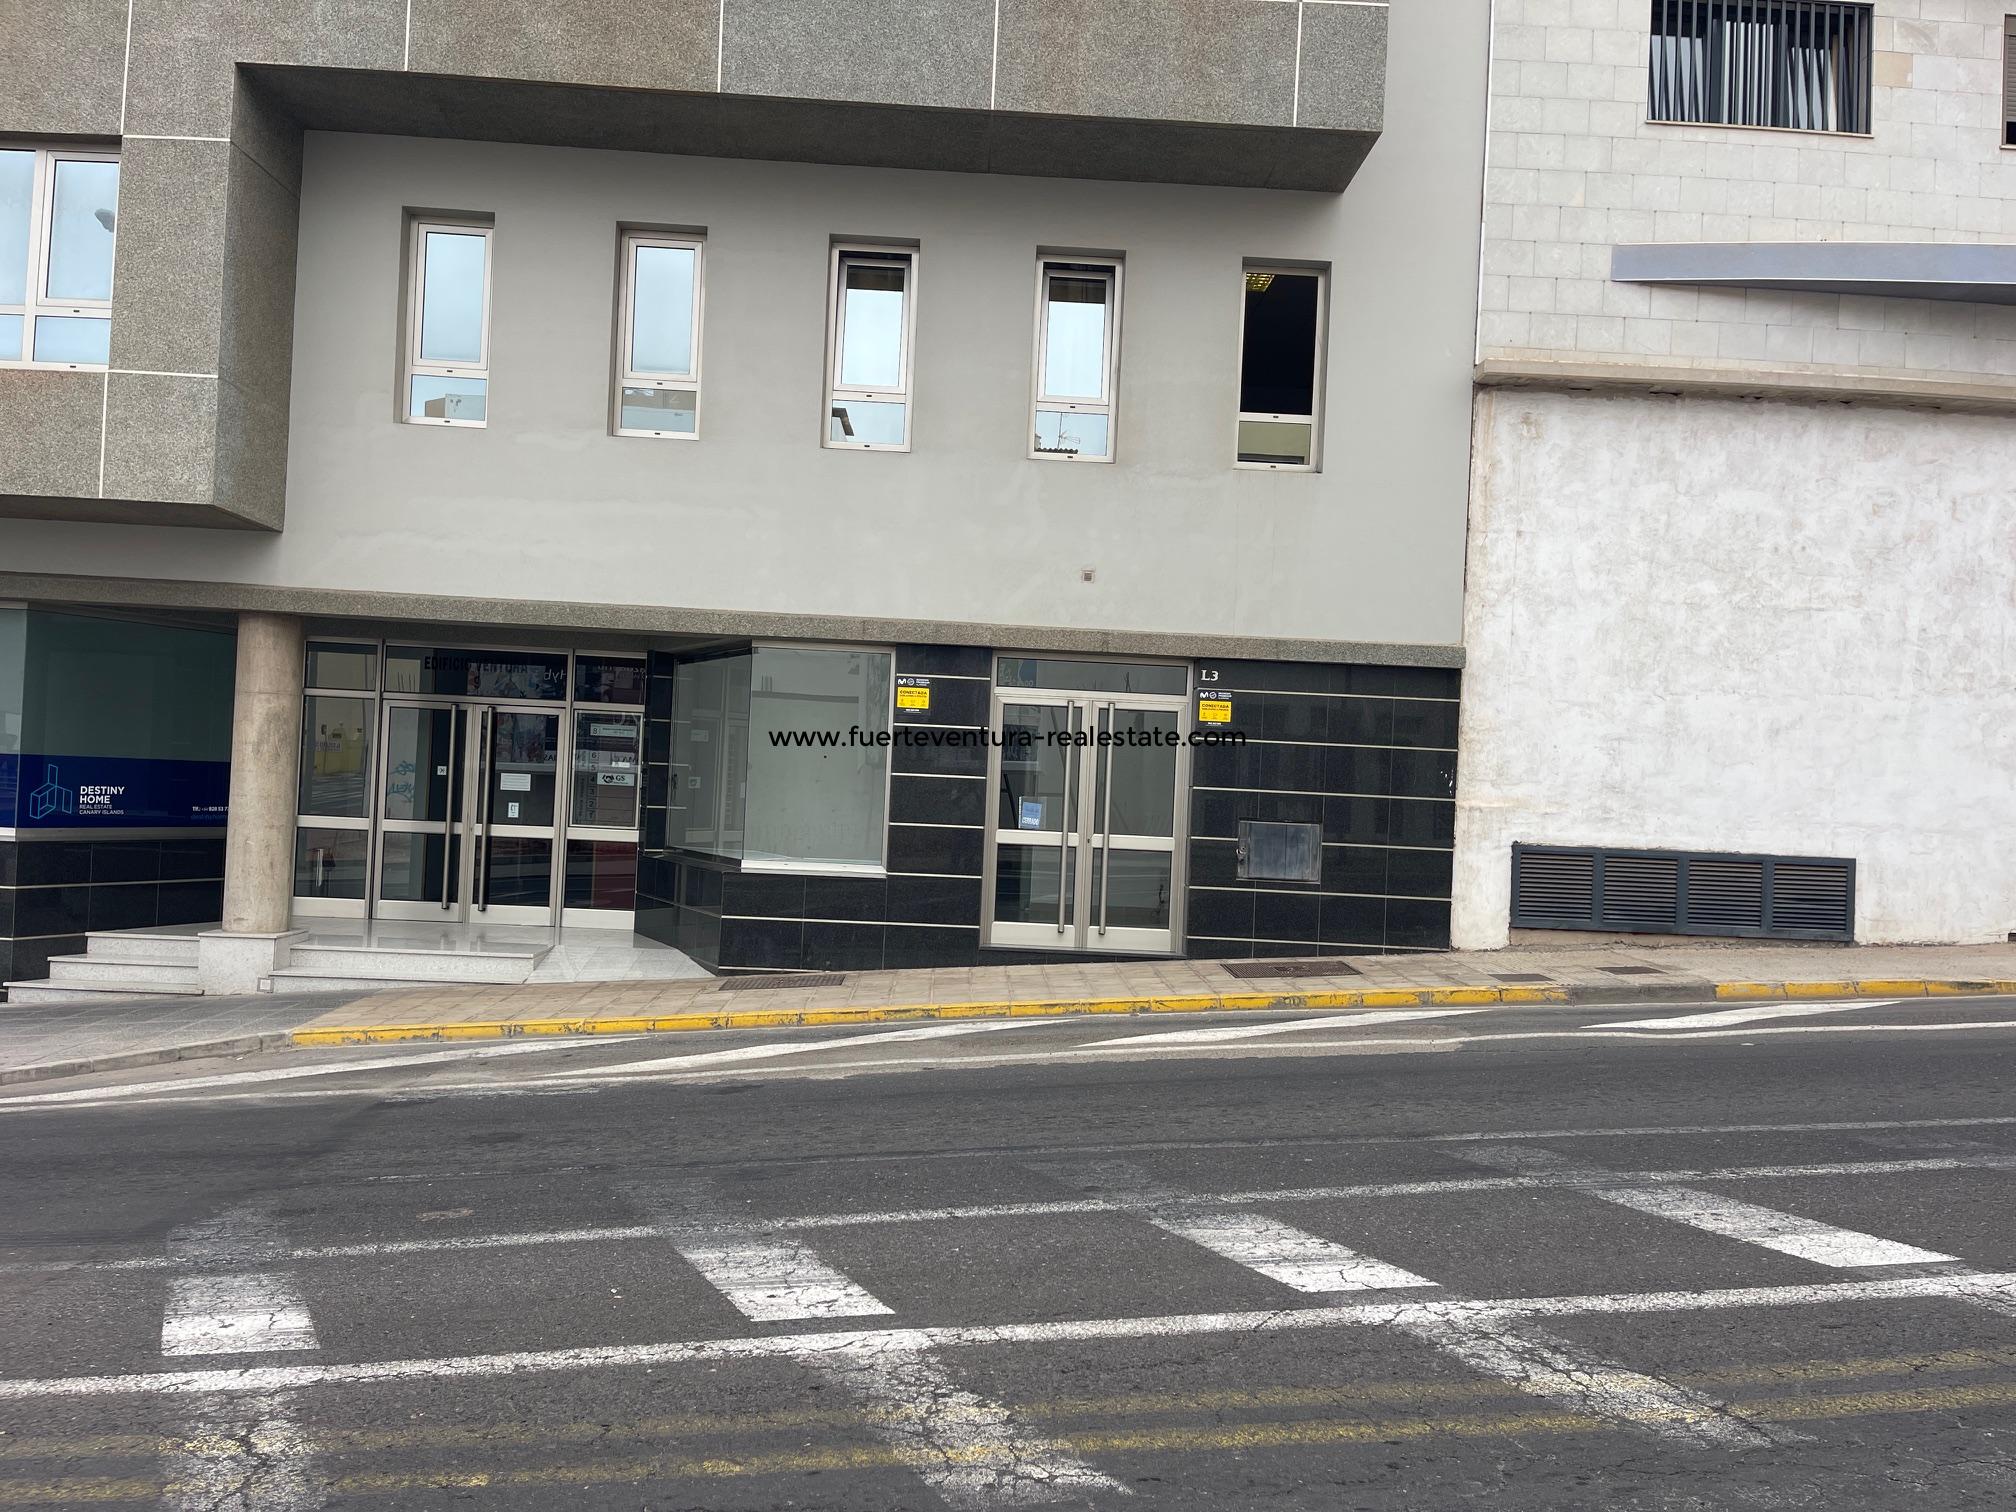  We are selling a comercial property in a prime location in Puerto del Rosario